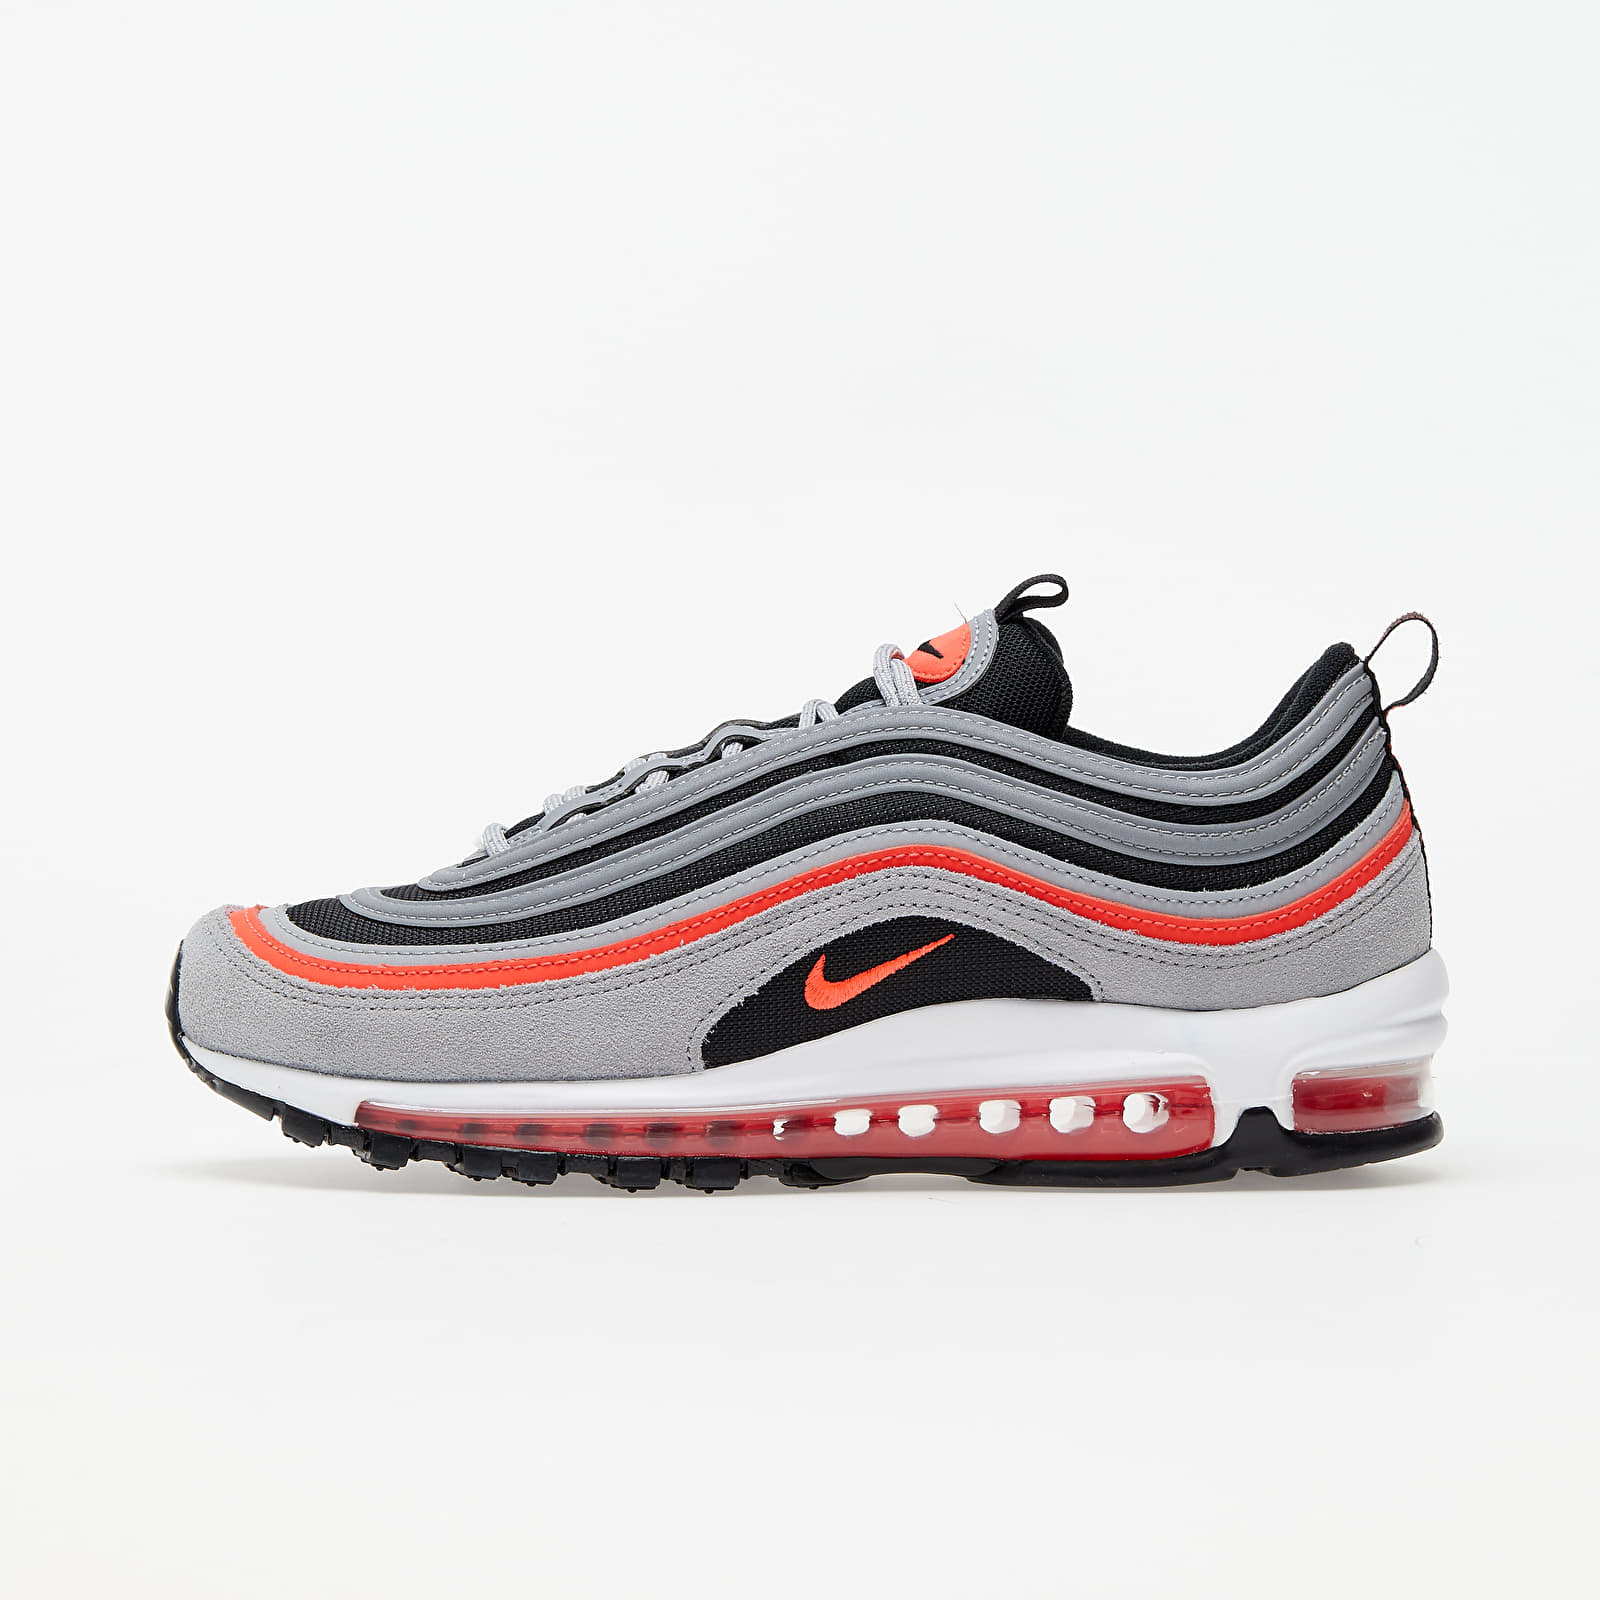 Chaussures et baskets homme Nike Air Max 97 Wolf Grey/ Radiant Red-Black-White